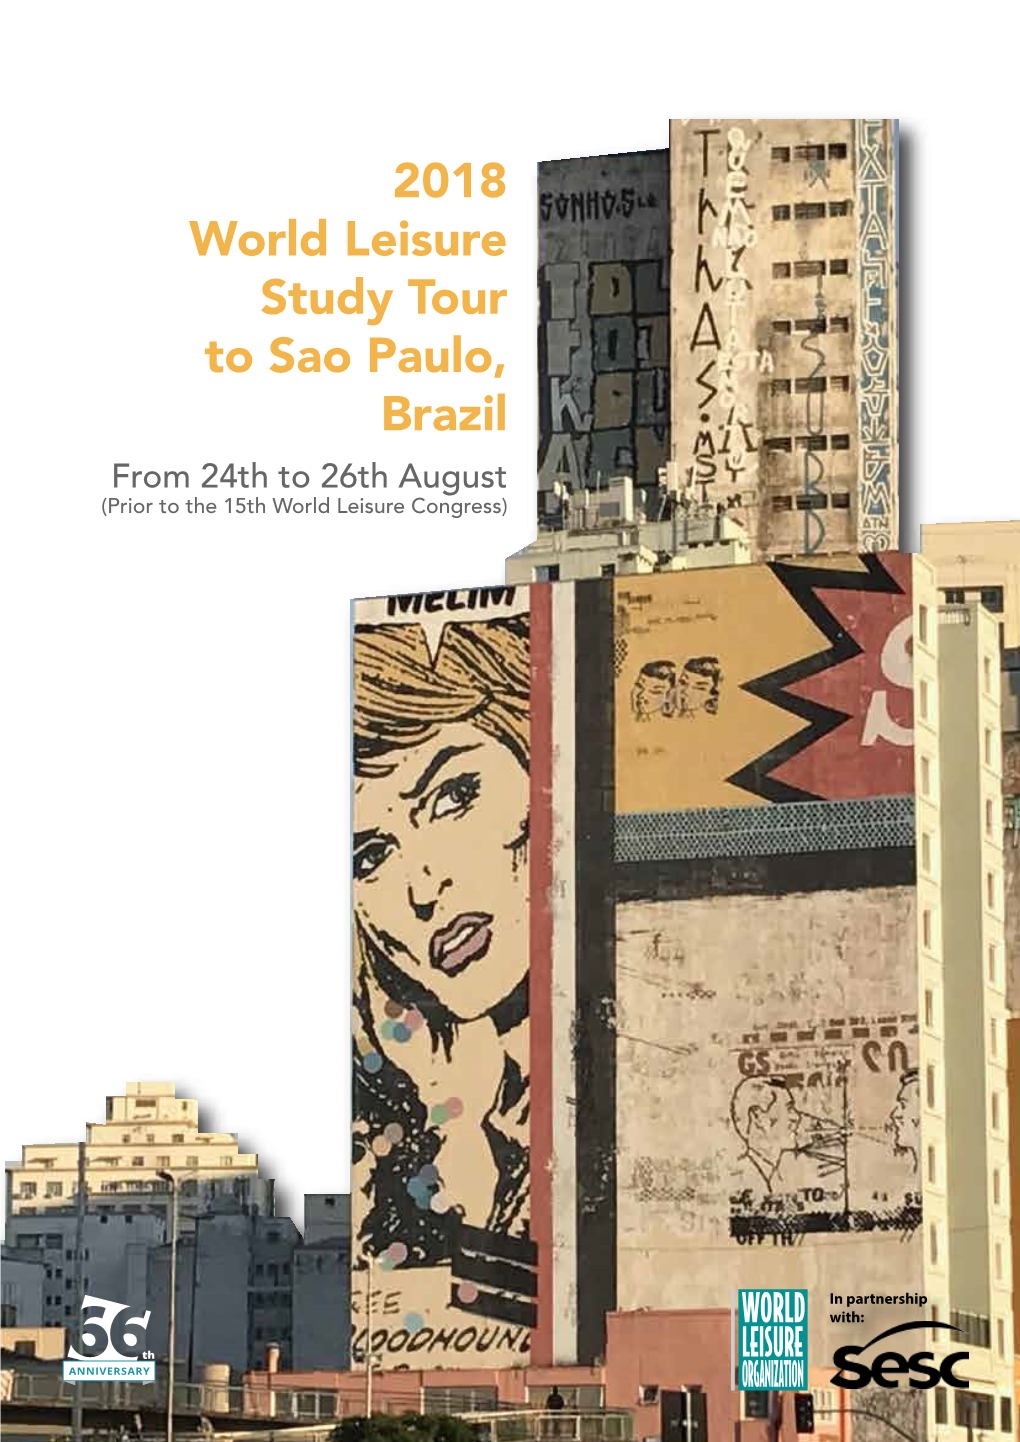 2018 World Leisure Study Tour to Sao Paulo, Brazil from 24Th to 26Th August (Prior to the 15Th World Leisure Congress)